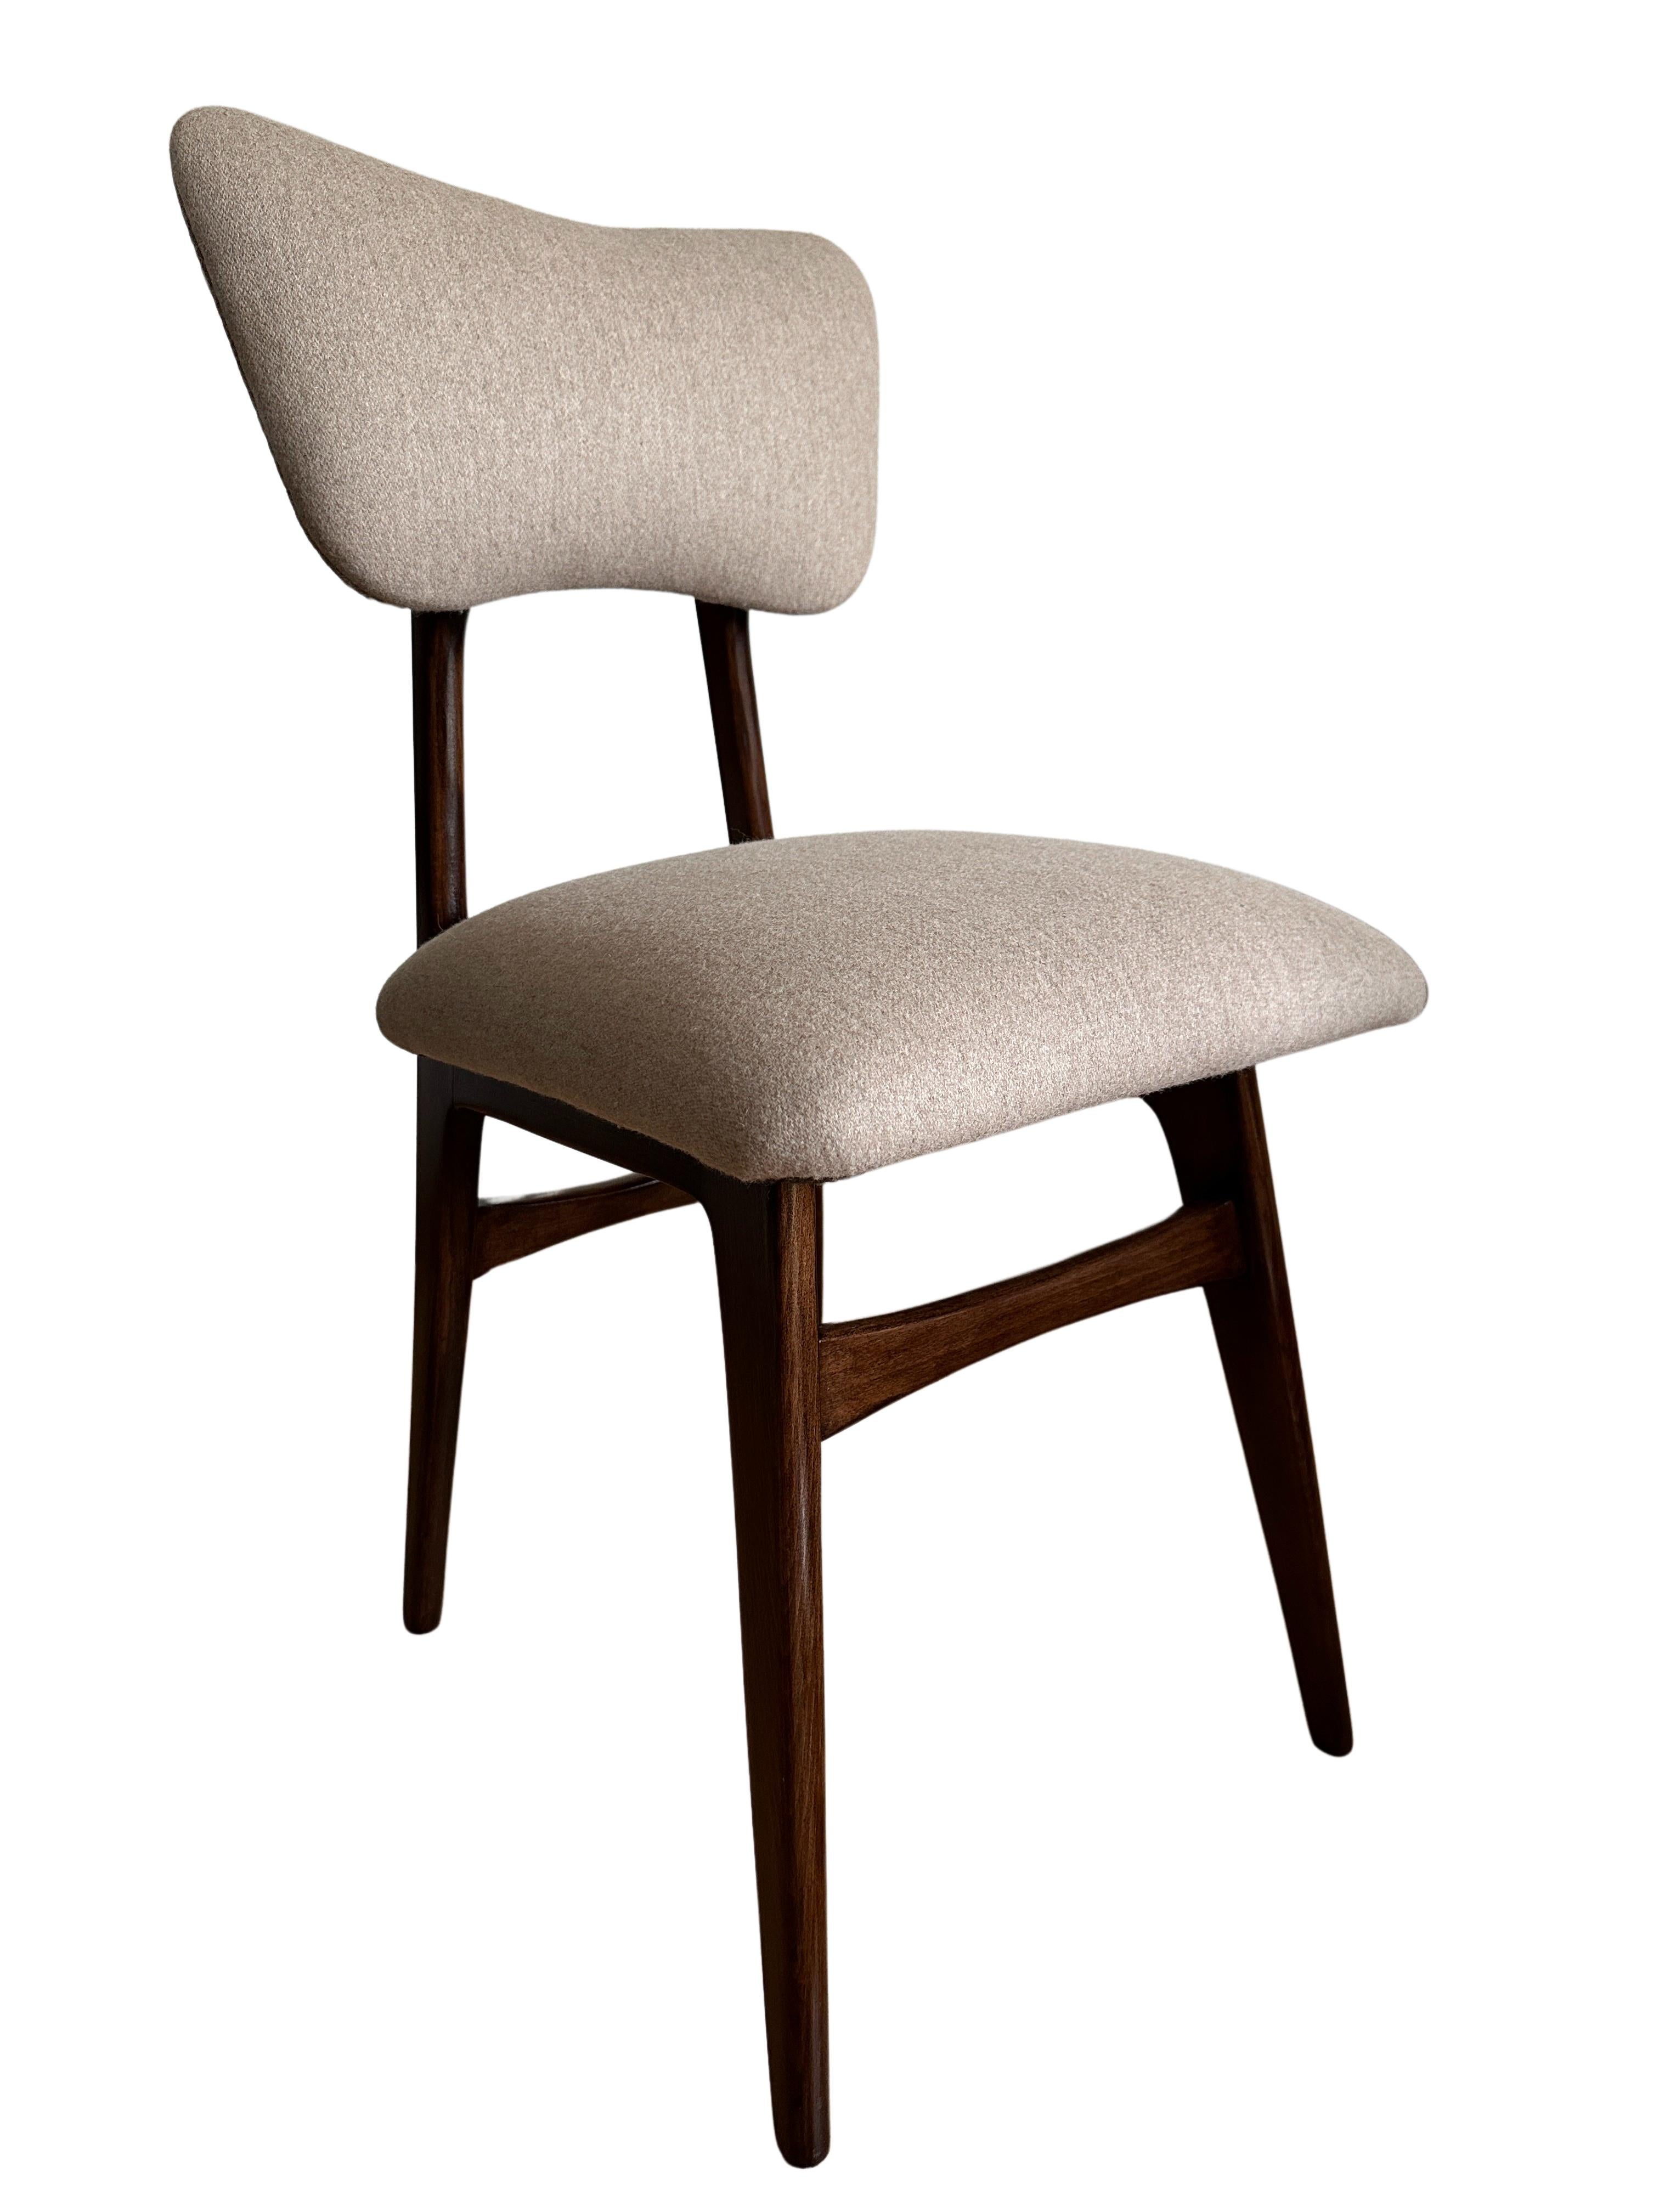 Polish Set of Two Midcentury Dining Chairs in Beige Wool Upholstery, Poland, 1960s For Sale